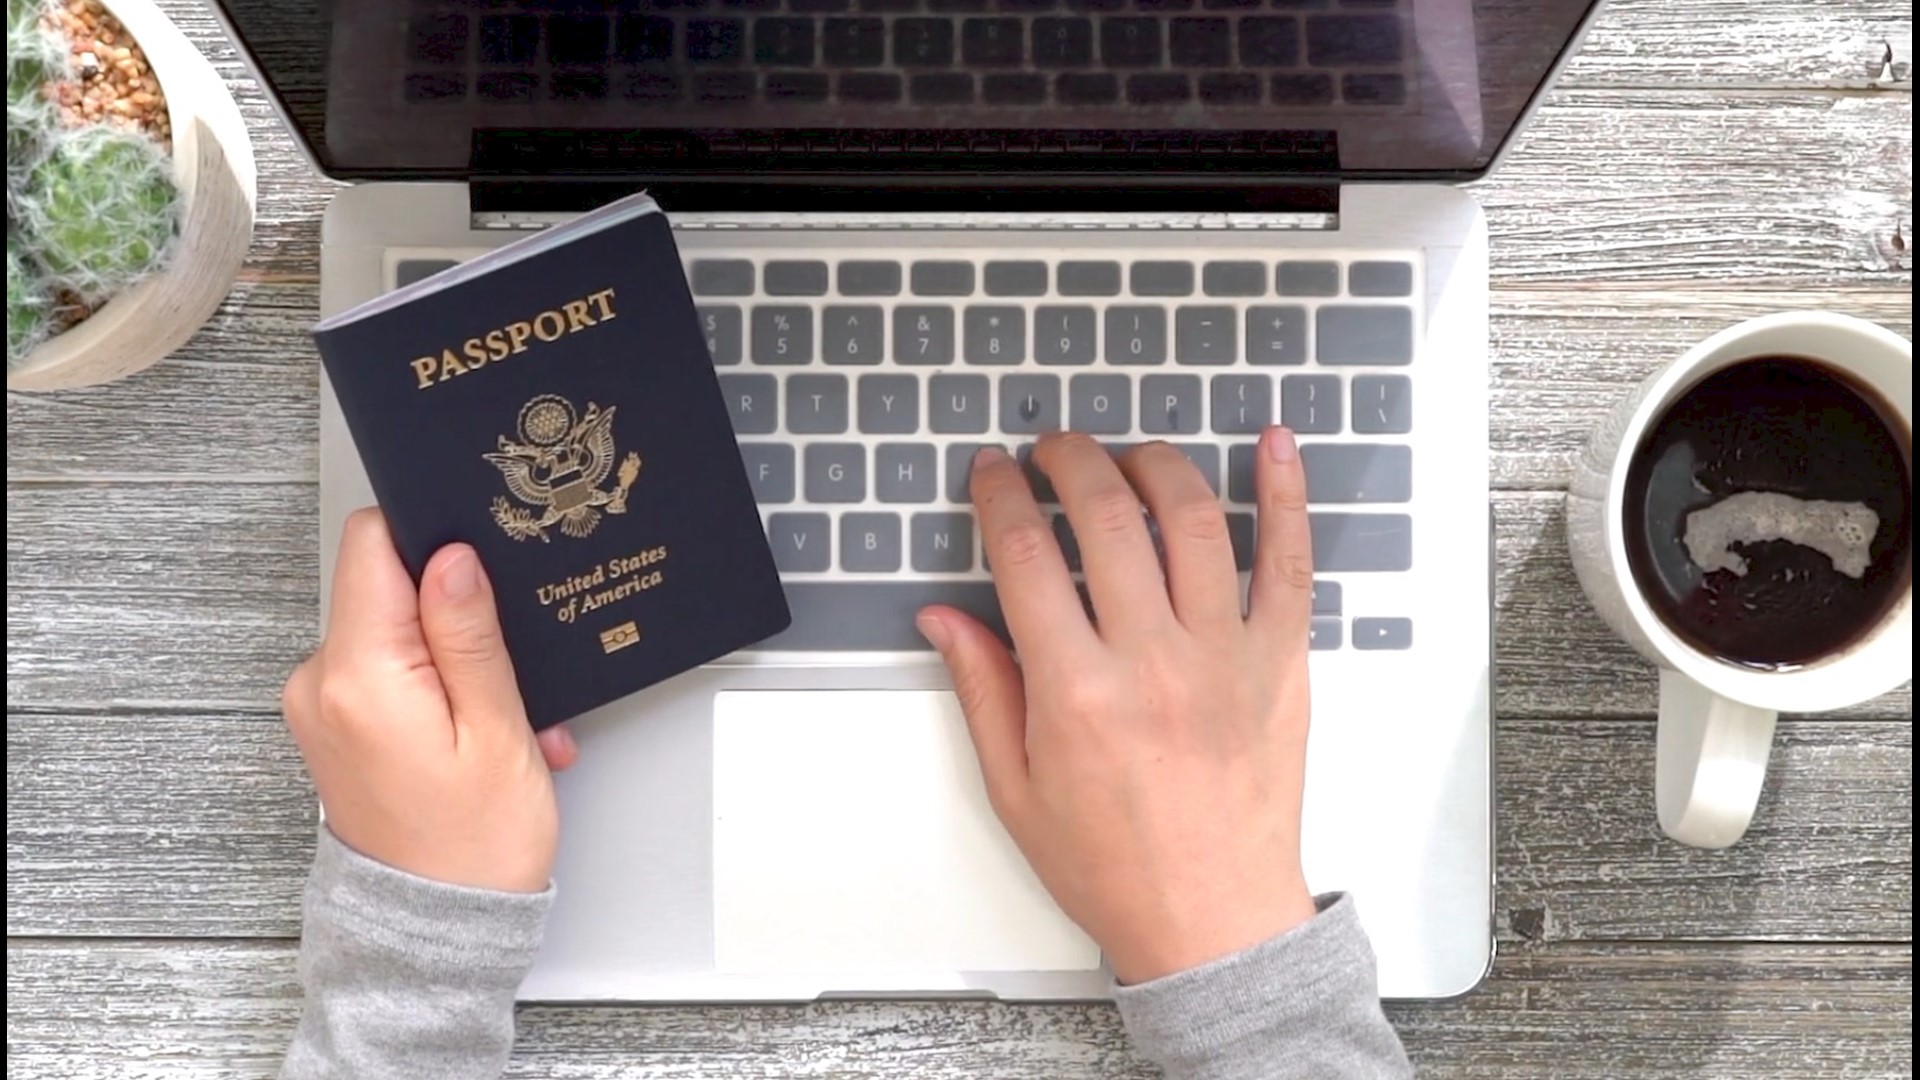 Even if international travel isn't on your mind right now, experts recommend starting the passport renewal process now if yours expires this year. Buzz60's TC Newman has more details.